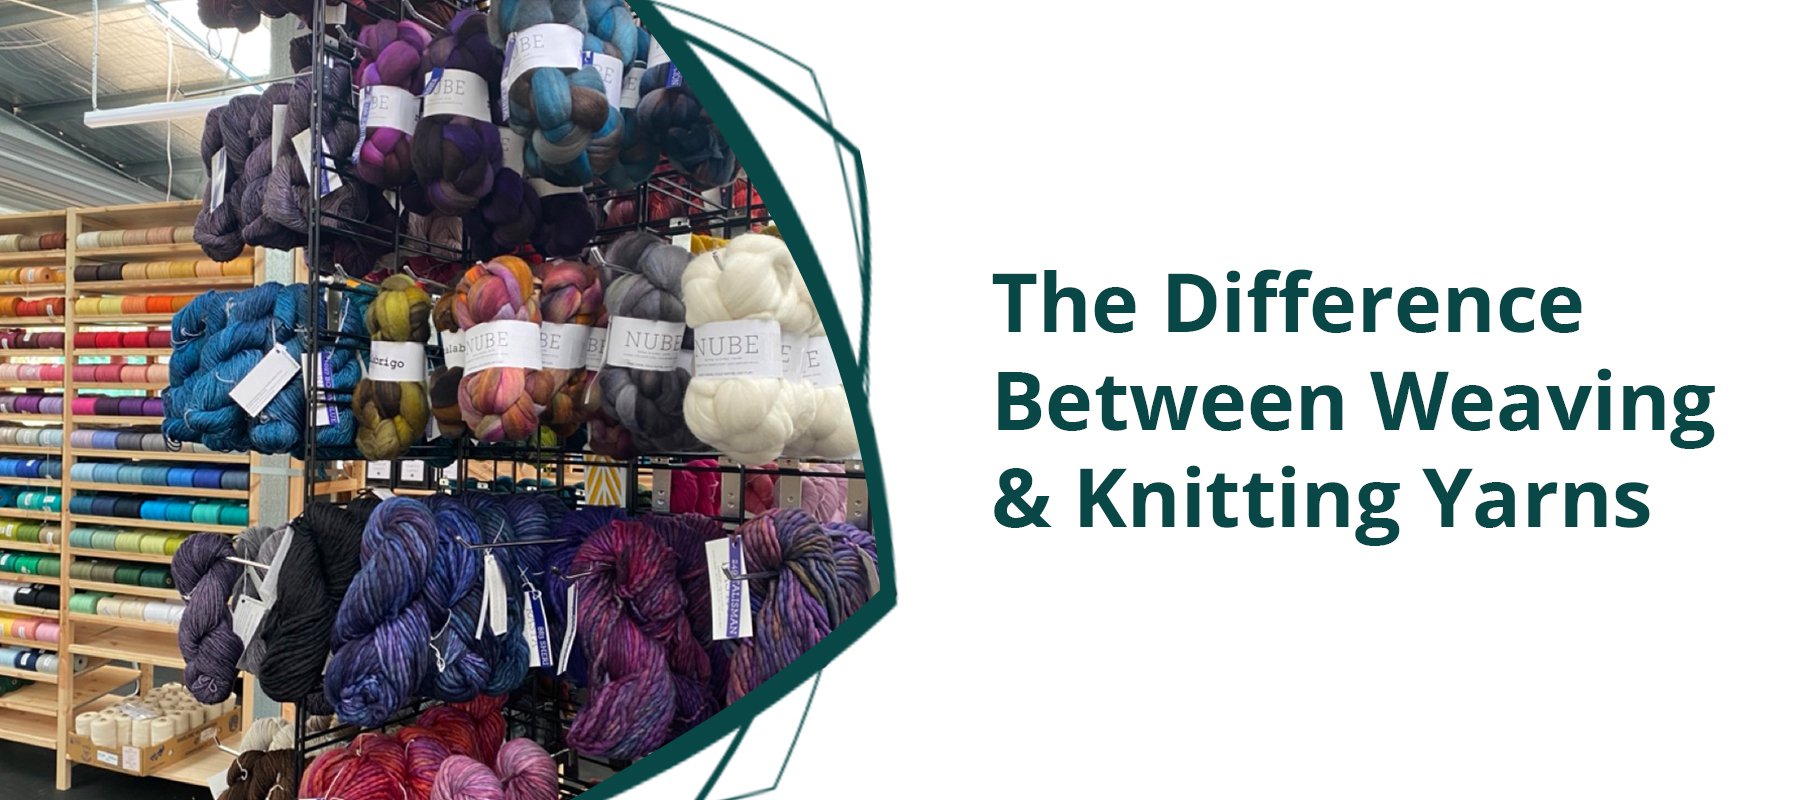 What is the Difference Between Weaving and Knitting Yarns